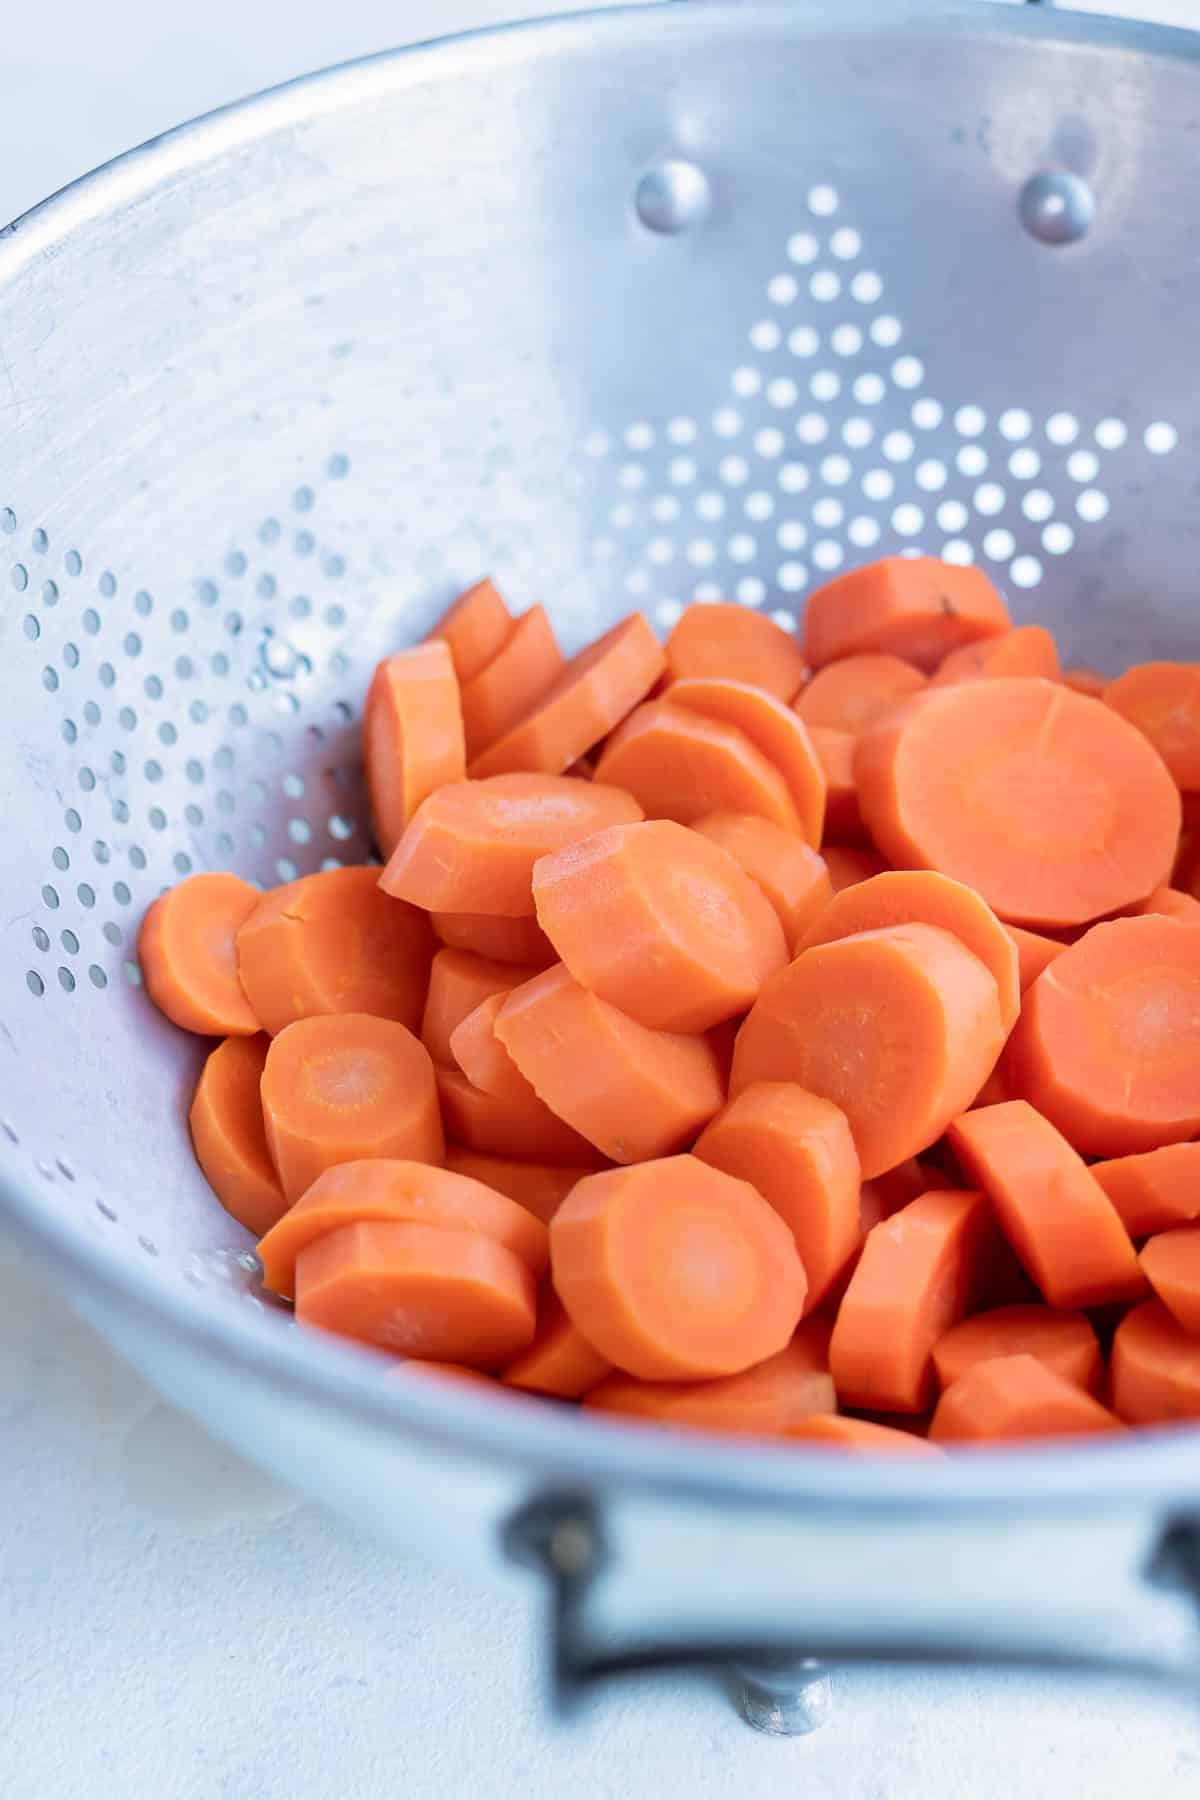 Boiled carrots are left in a strainer.